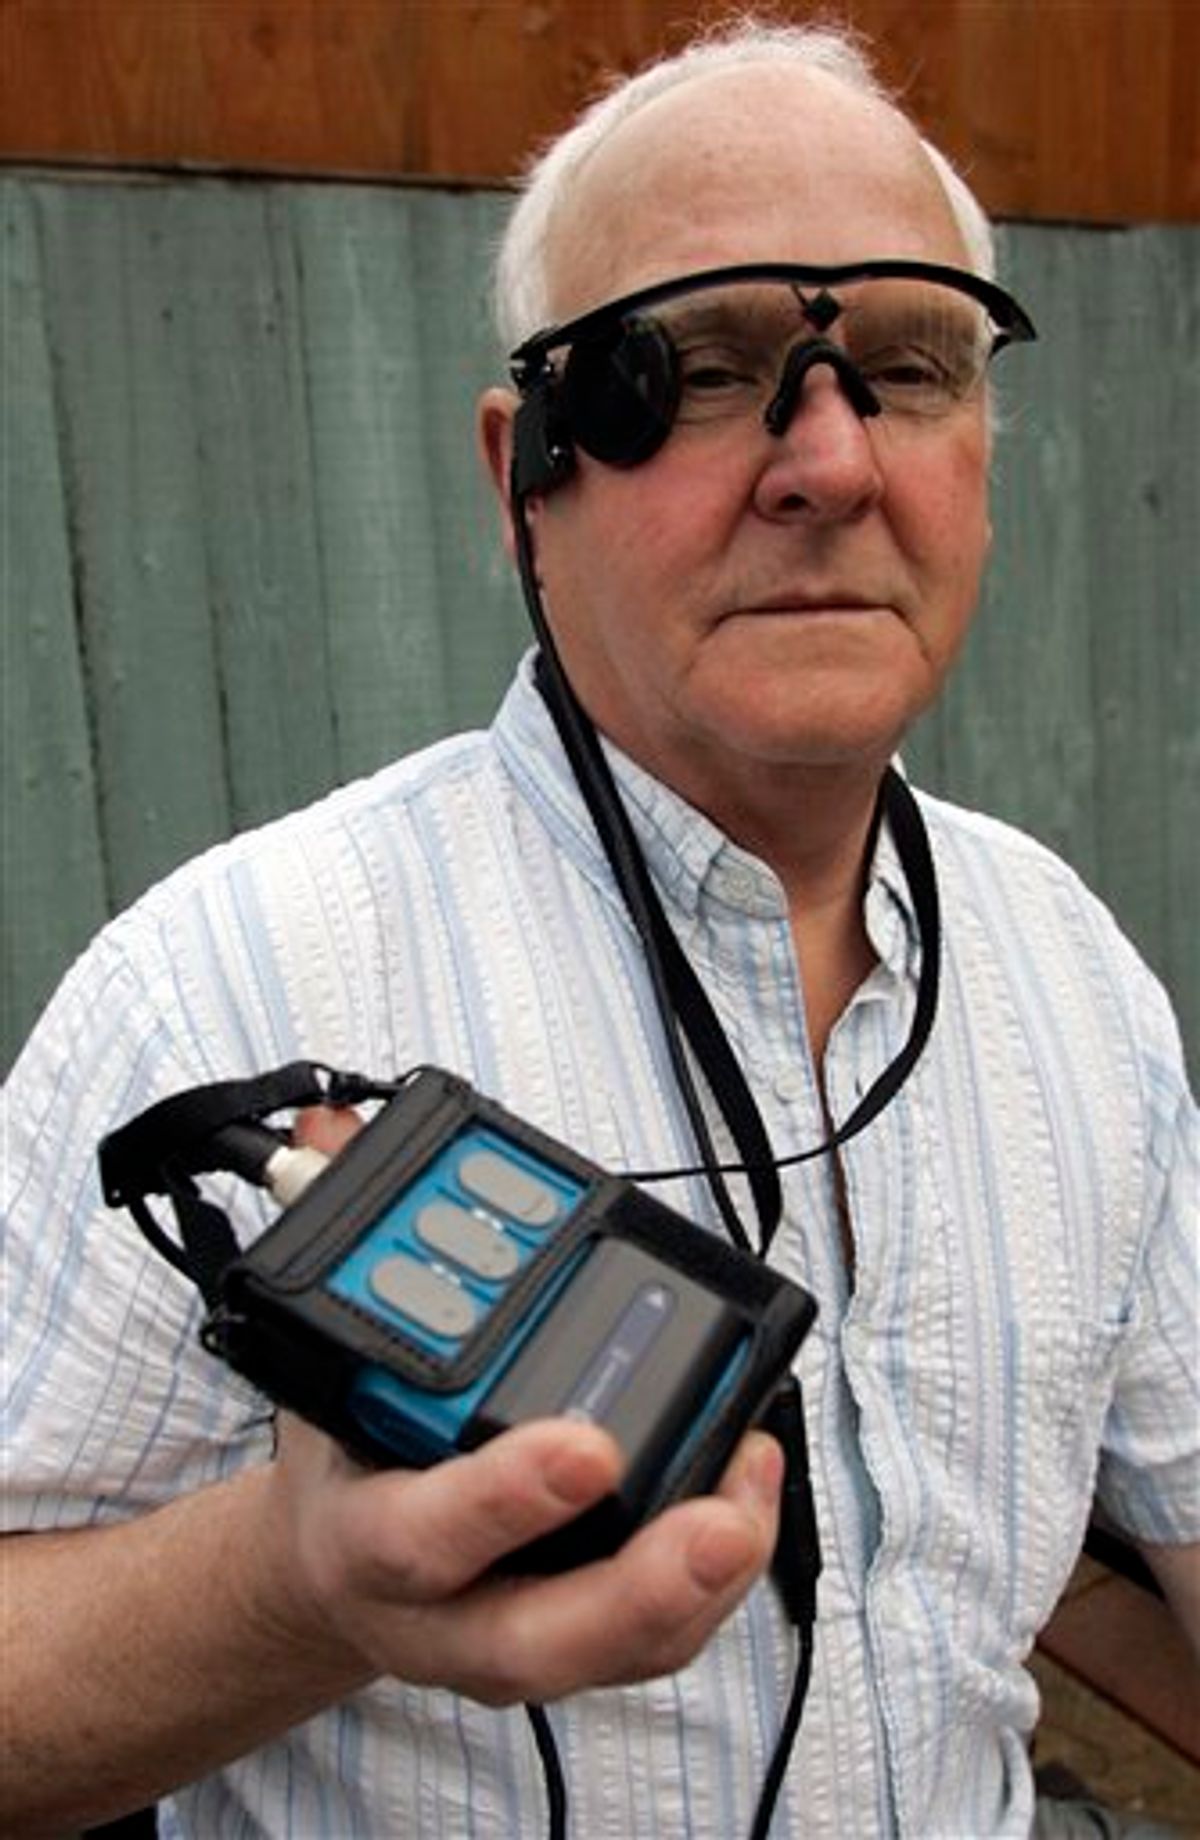 In this photo taken Saturday, Feb. 12, 2011, Eric Selby poses for a photograph with a "sight" camera fitted in a pair of glasses, as well as its associated computer and transmitter, which work in conjunction with an artificial retina implant called the Argus II fitted in his right eye, enabling him to detect light, in Coventry, England. For two decades, Eric Selby, 68, had been completely blind and dependent on a guide dog to get around. But after having an artificial retina put into his right eye, he can detect ordinary things like the curb and pavement when he's walking outside. (AP Photo/Martin Cleaver) (AP)